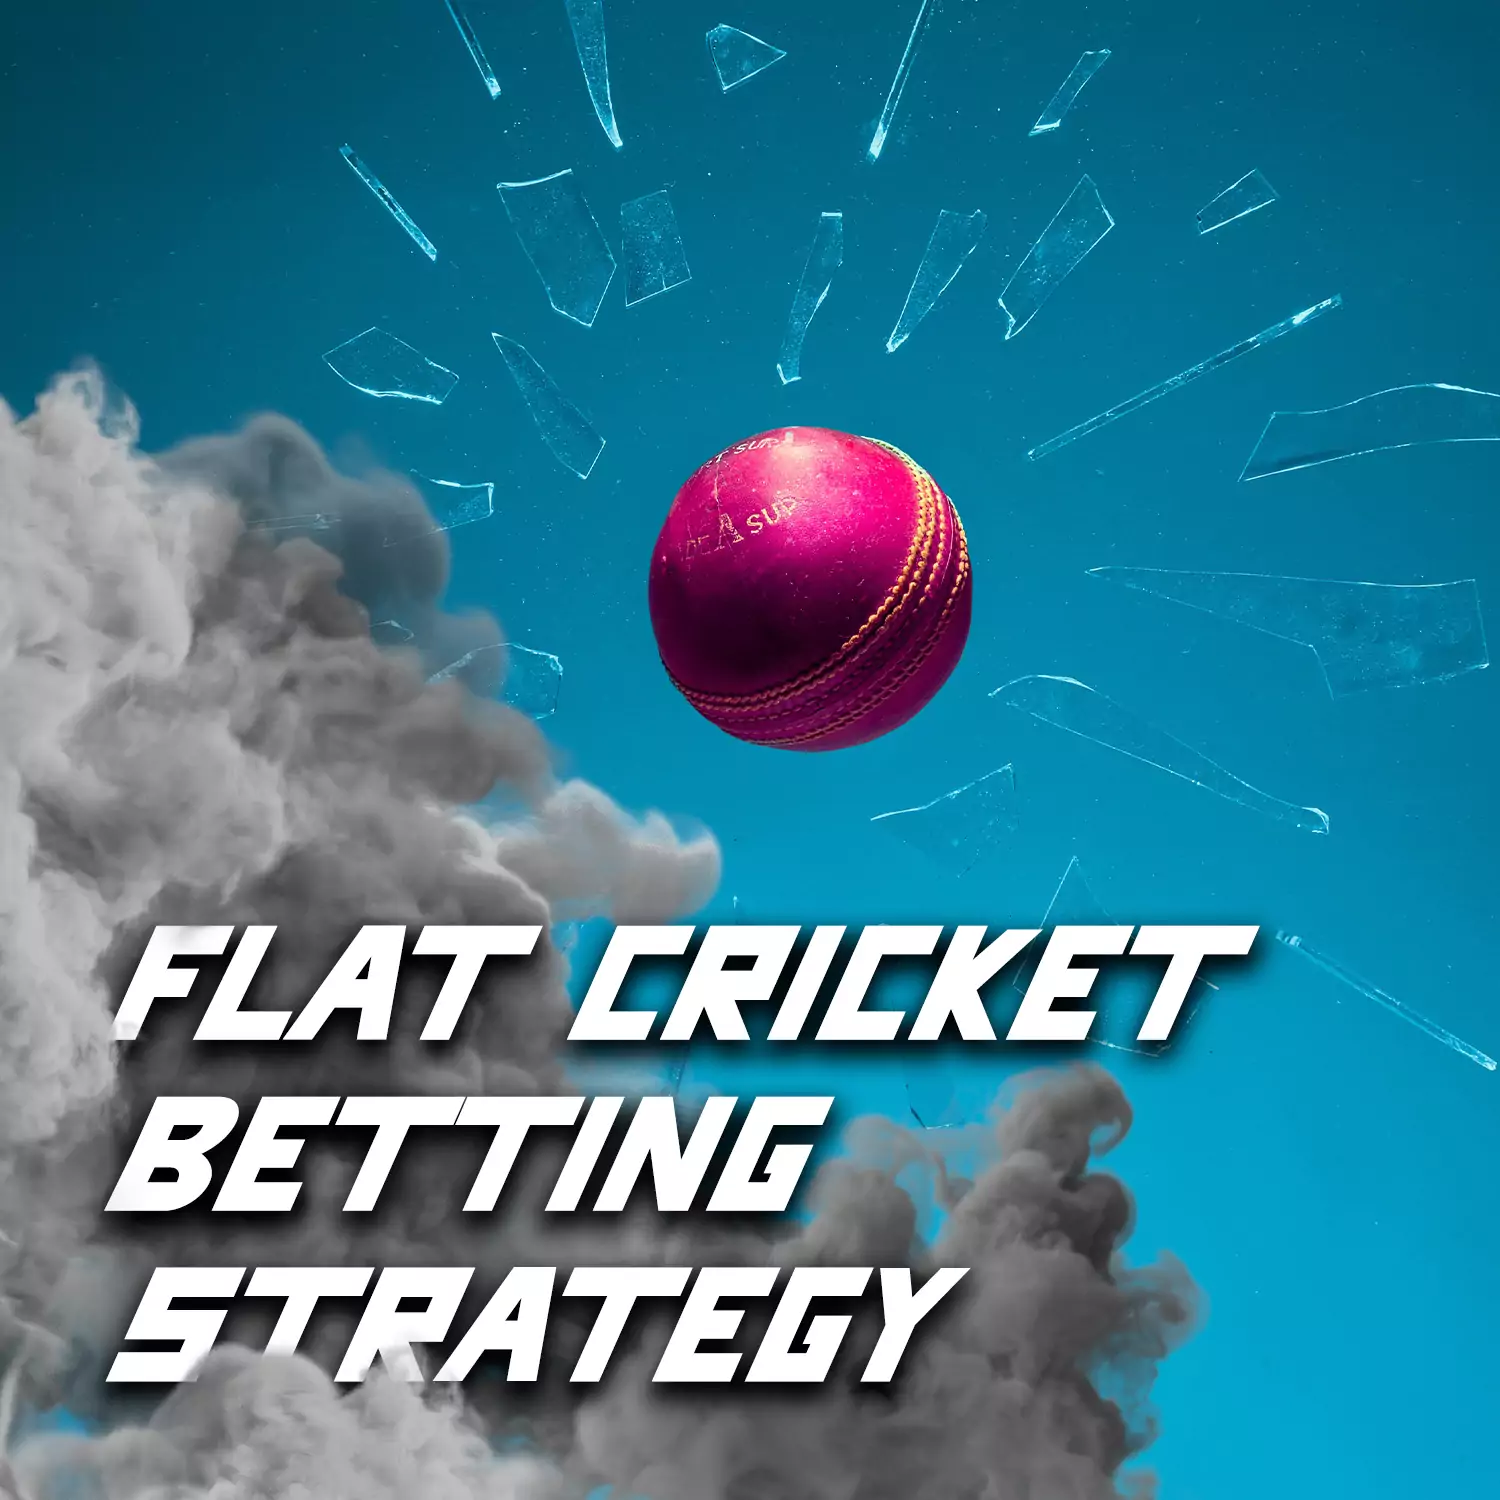 Use a flat cricket betting strategy to increase your odds of winning.